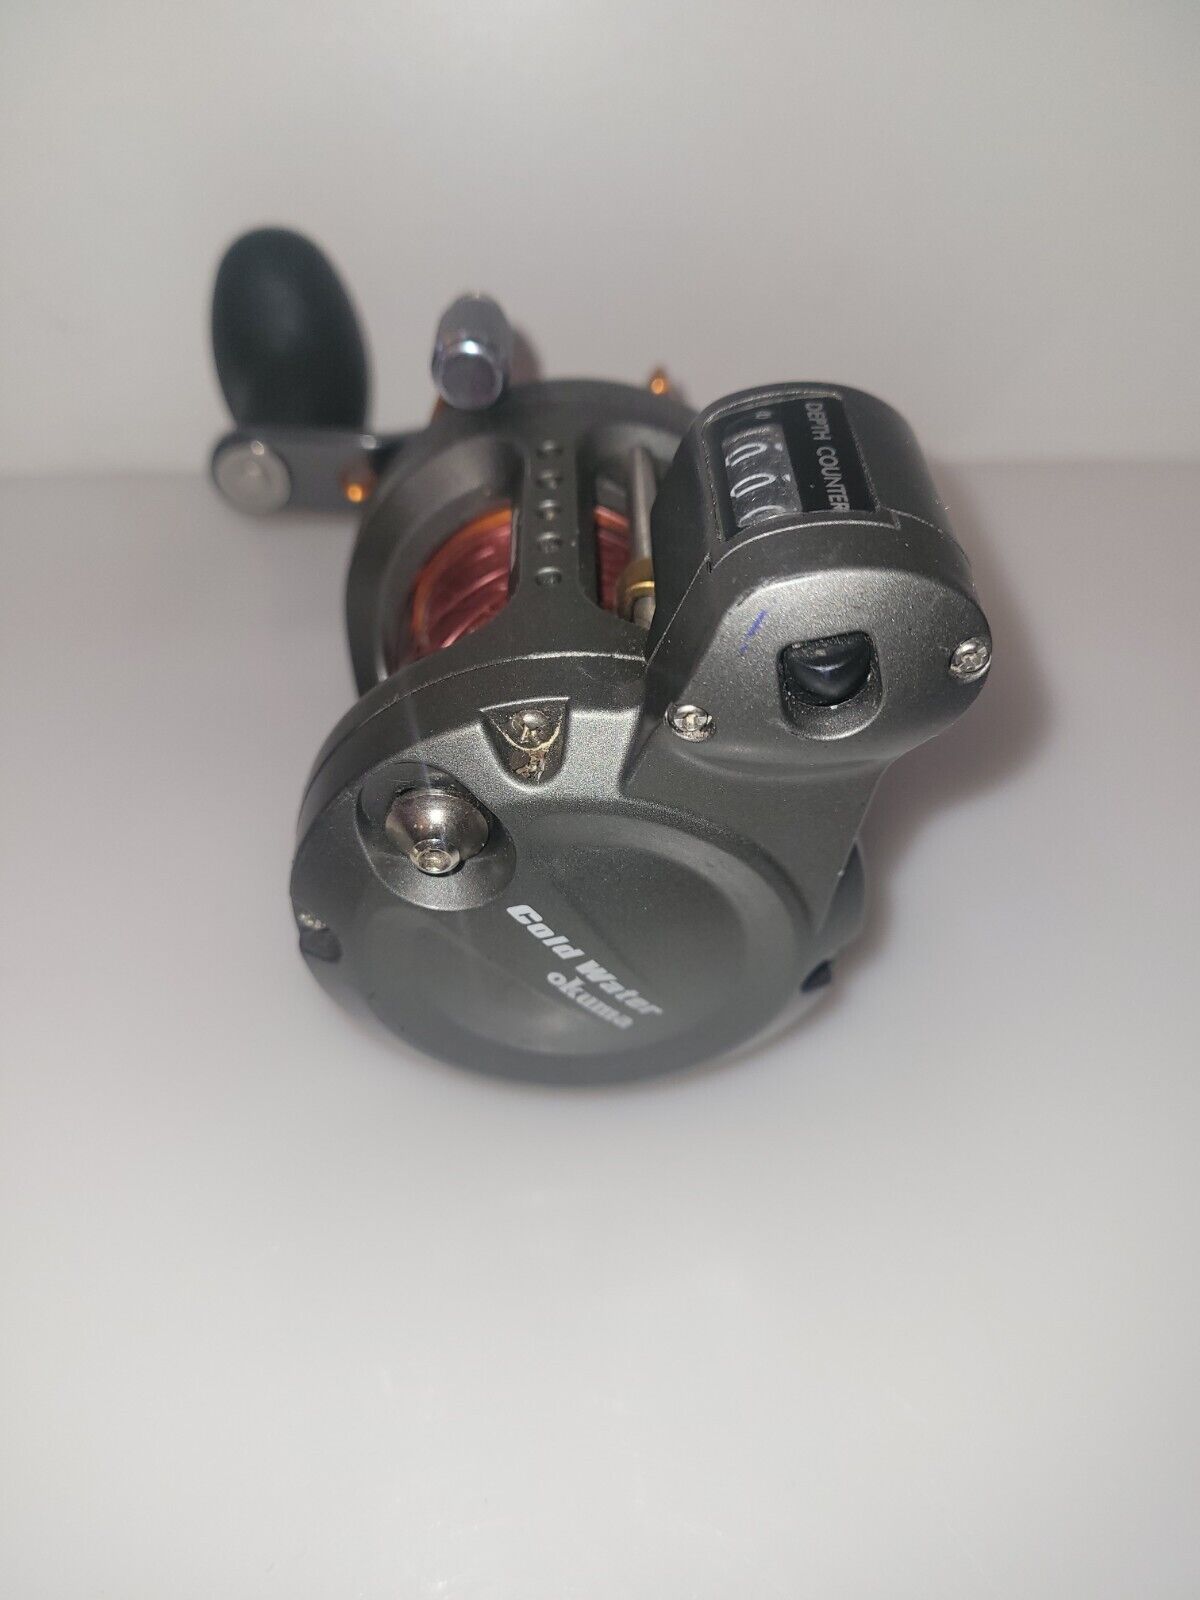 Okuma cold water line counter trolling reel  CW-153dlx 5.1:1 right handed